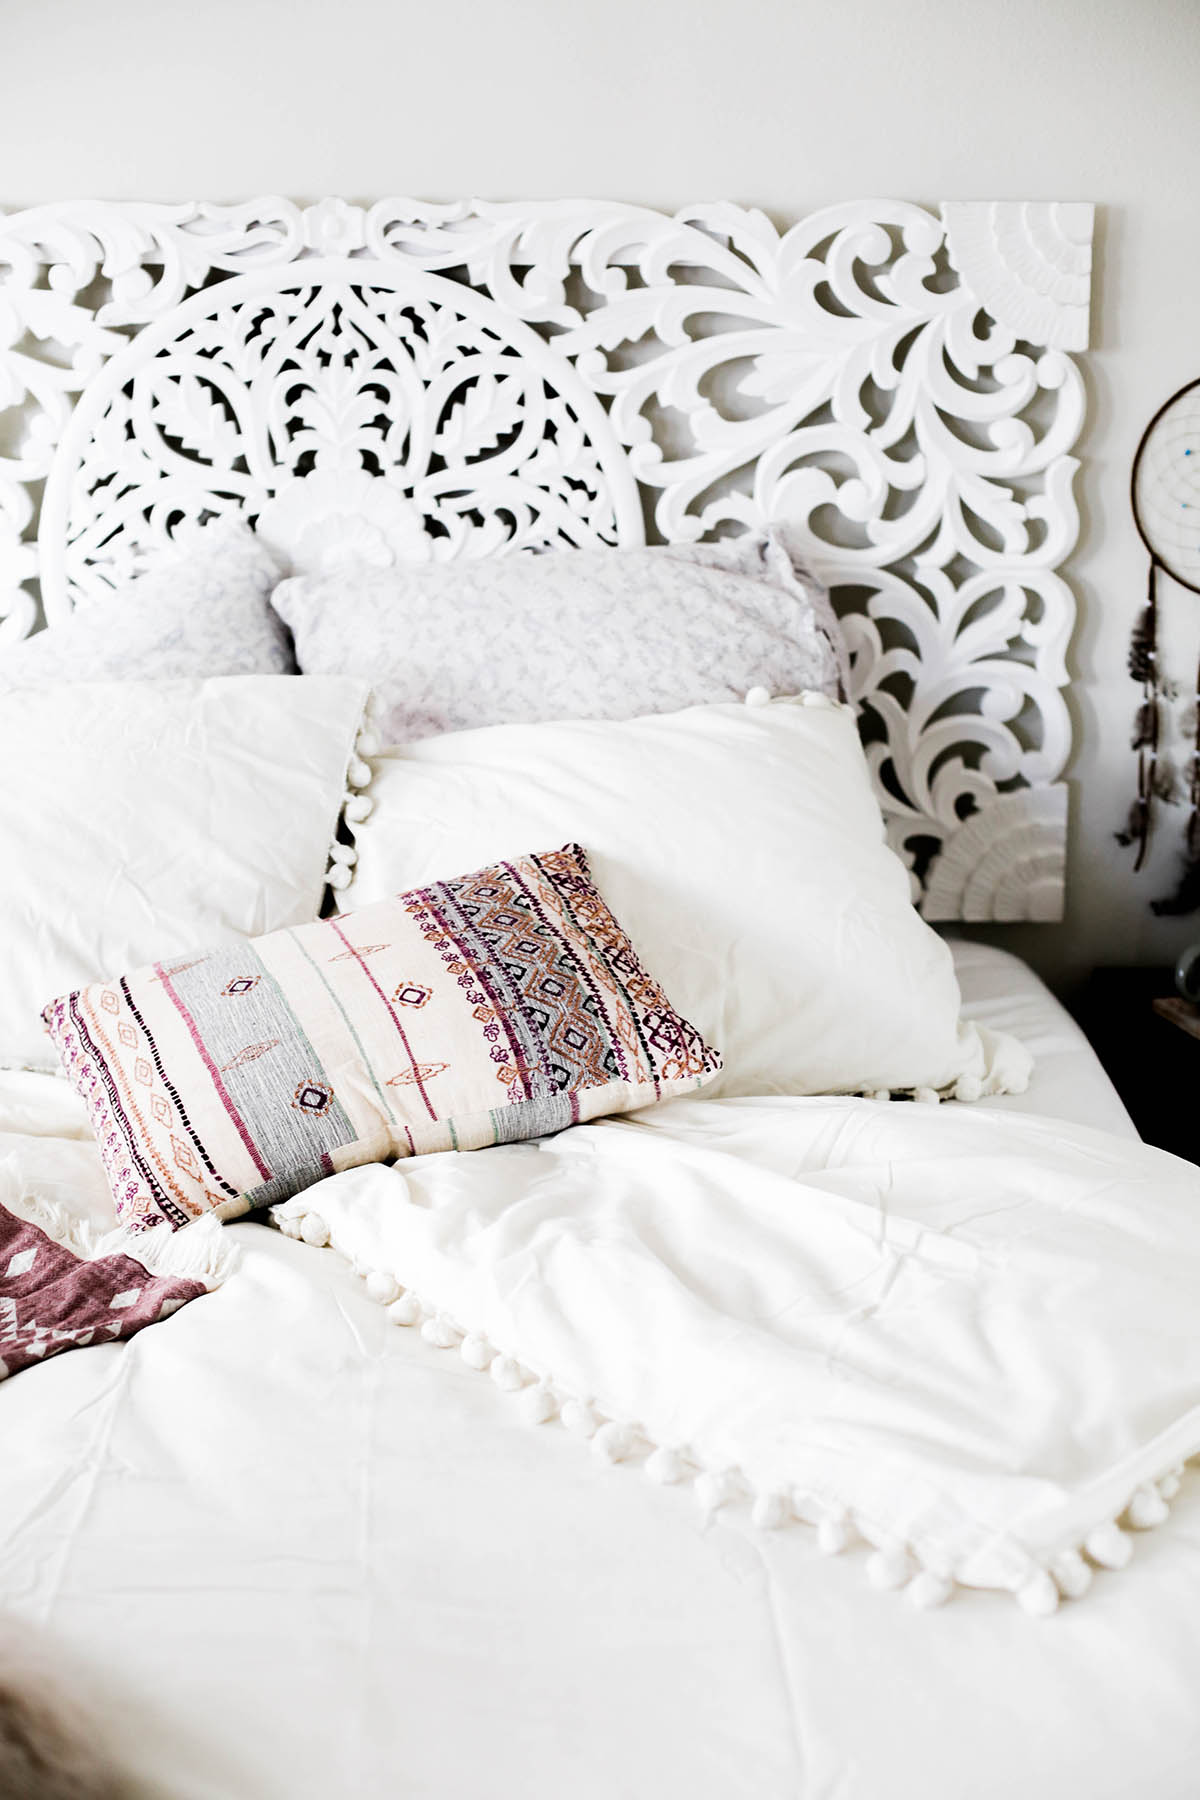 How to Brighten Up Your Bedroom for Summer – Advice from a Twenty Something